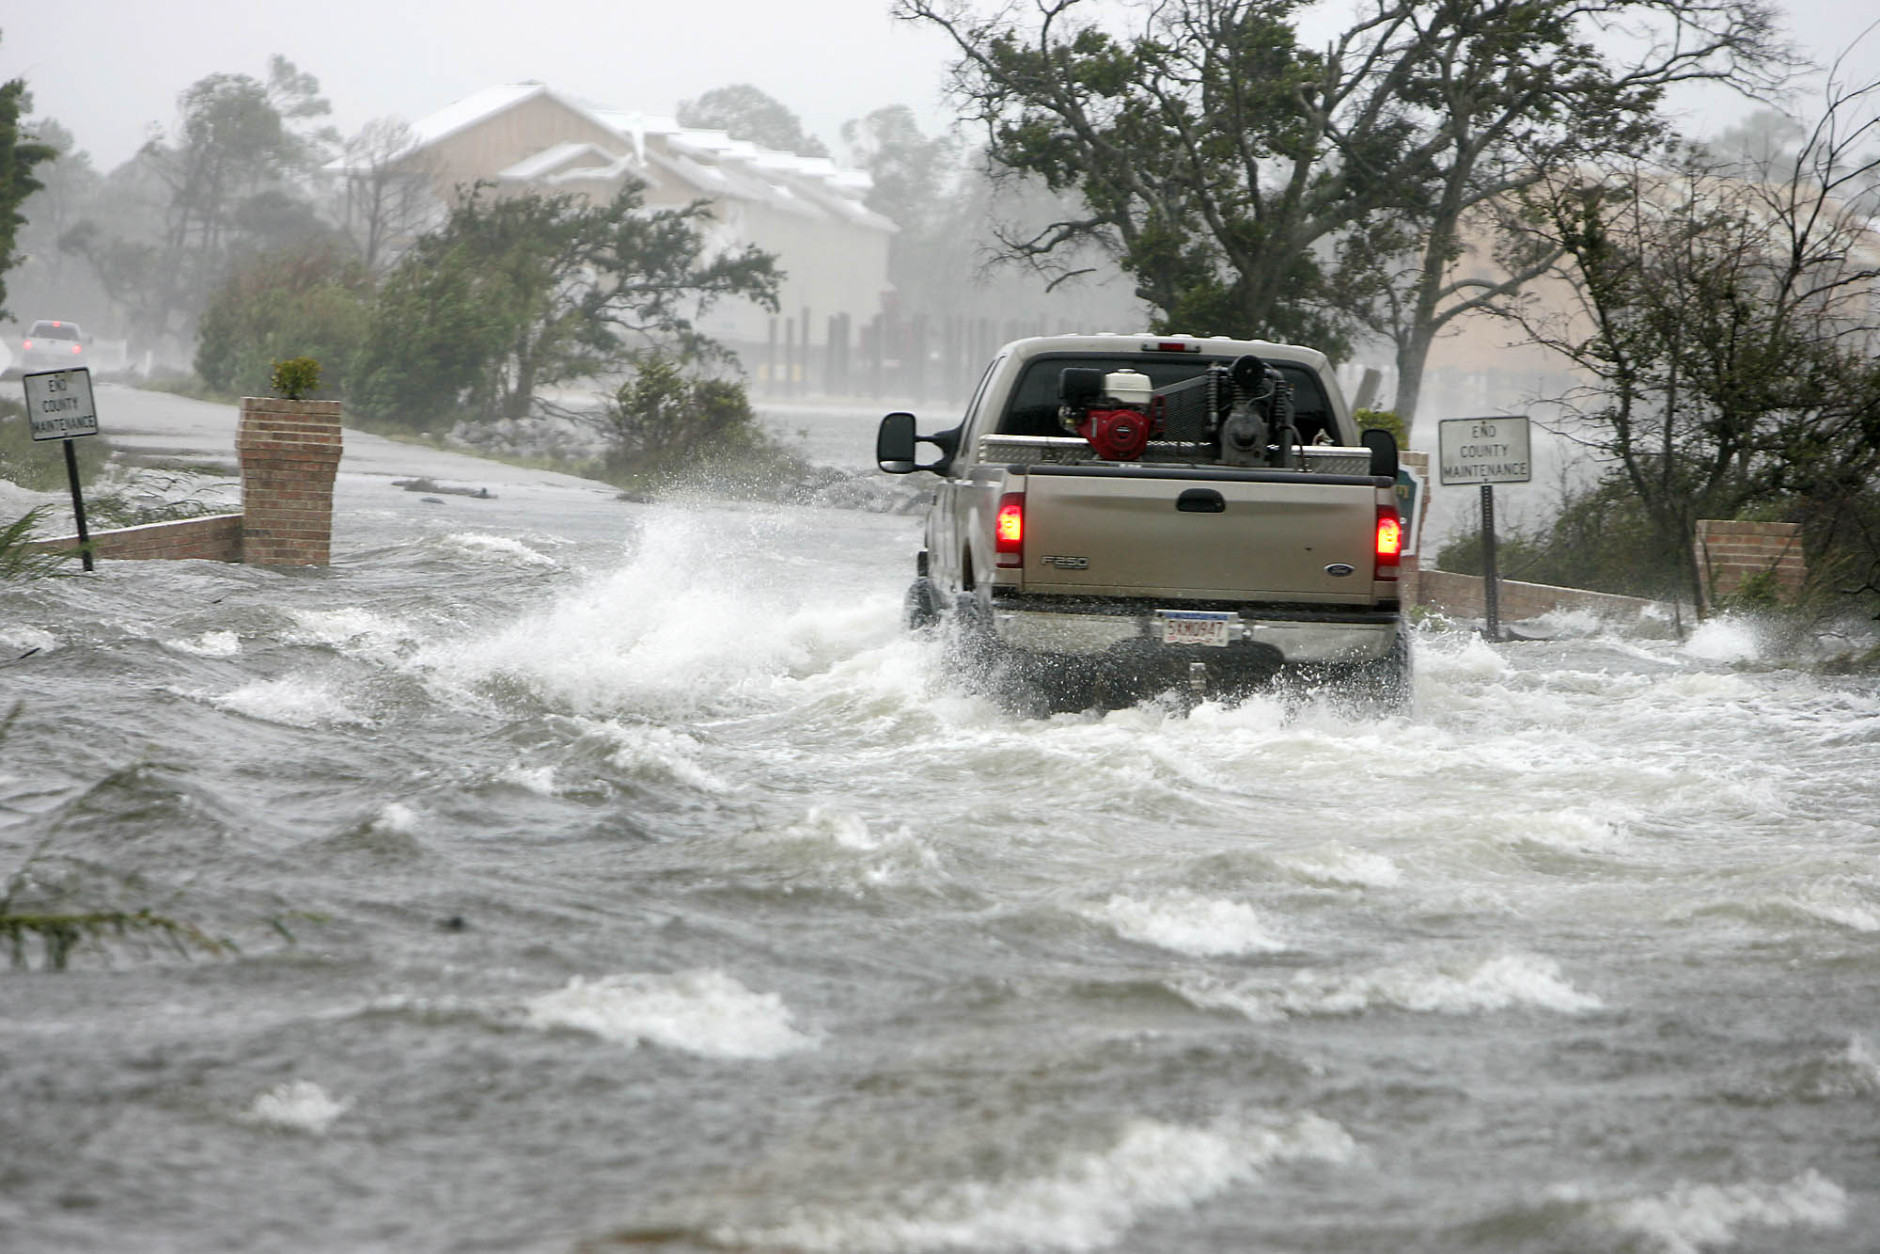 A vehicle makes its way through a flooded street from the overflowing  Grande Lagoon  in Pensacola, Fla., as Hurricane Katrina passes through the area, Monday, Aug. 29, 2005. (AP Photo/Peter Cosgrove)